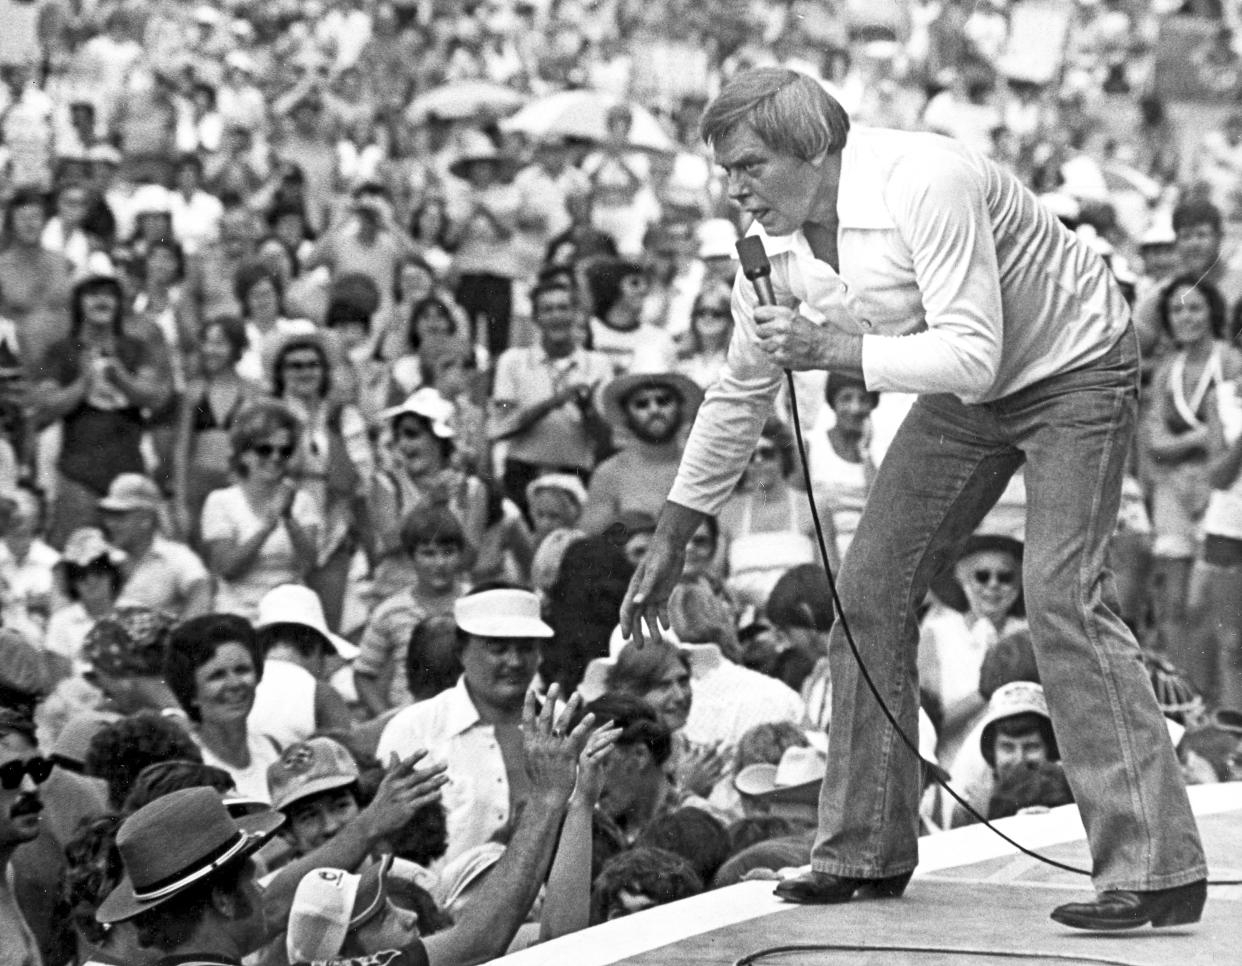 FILE - In this July 16, 1977 file photo, Singer Tom T. Hall leans to the edge of the stage at the Jamboree in the Hills to meet the people near St. Clairsville, Ohio. Singer-songwriter Tom T. Hall, who composed “Harper Valley P.T.A.” and sang about life’s simple joys as country music’s consummate blue collar bard, has died. He was 85. His son, Dean Hall, confirmed the musician's death Friday, Aug. 20, 2021 at his home in Franklin, Tennessee.(AP Photo/File)